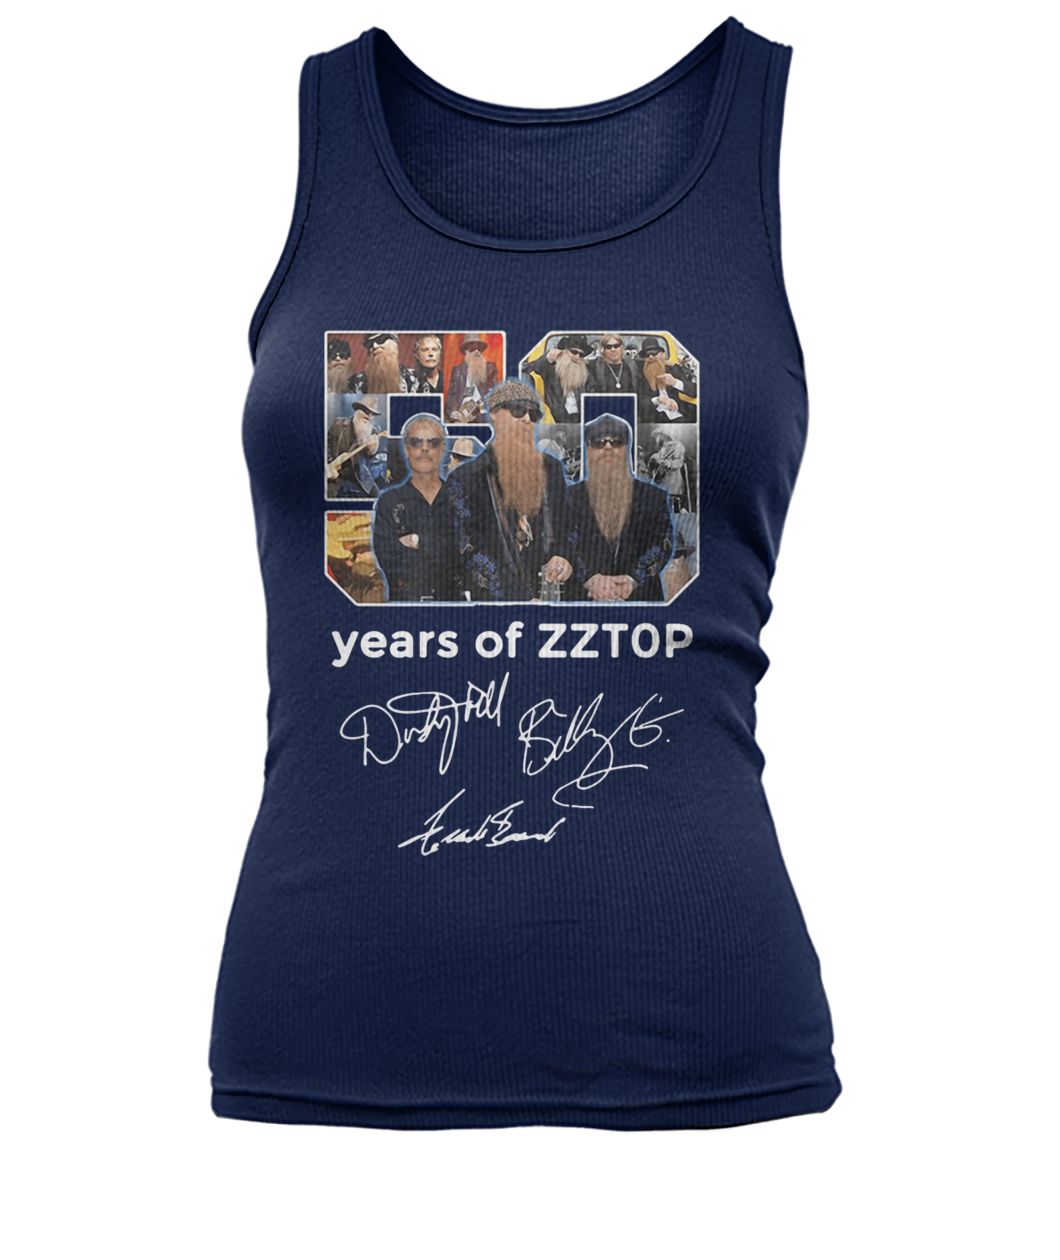 50 years of zz top anniversary tour 2019 signatures women's tank top